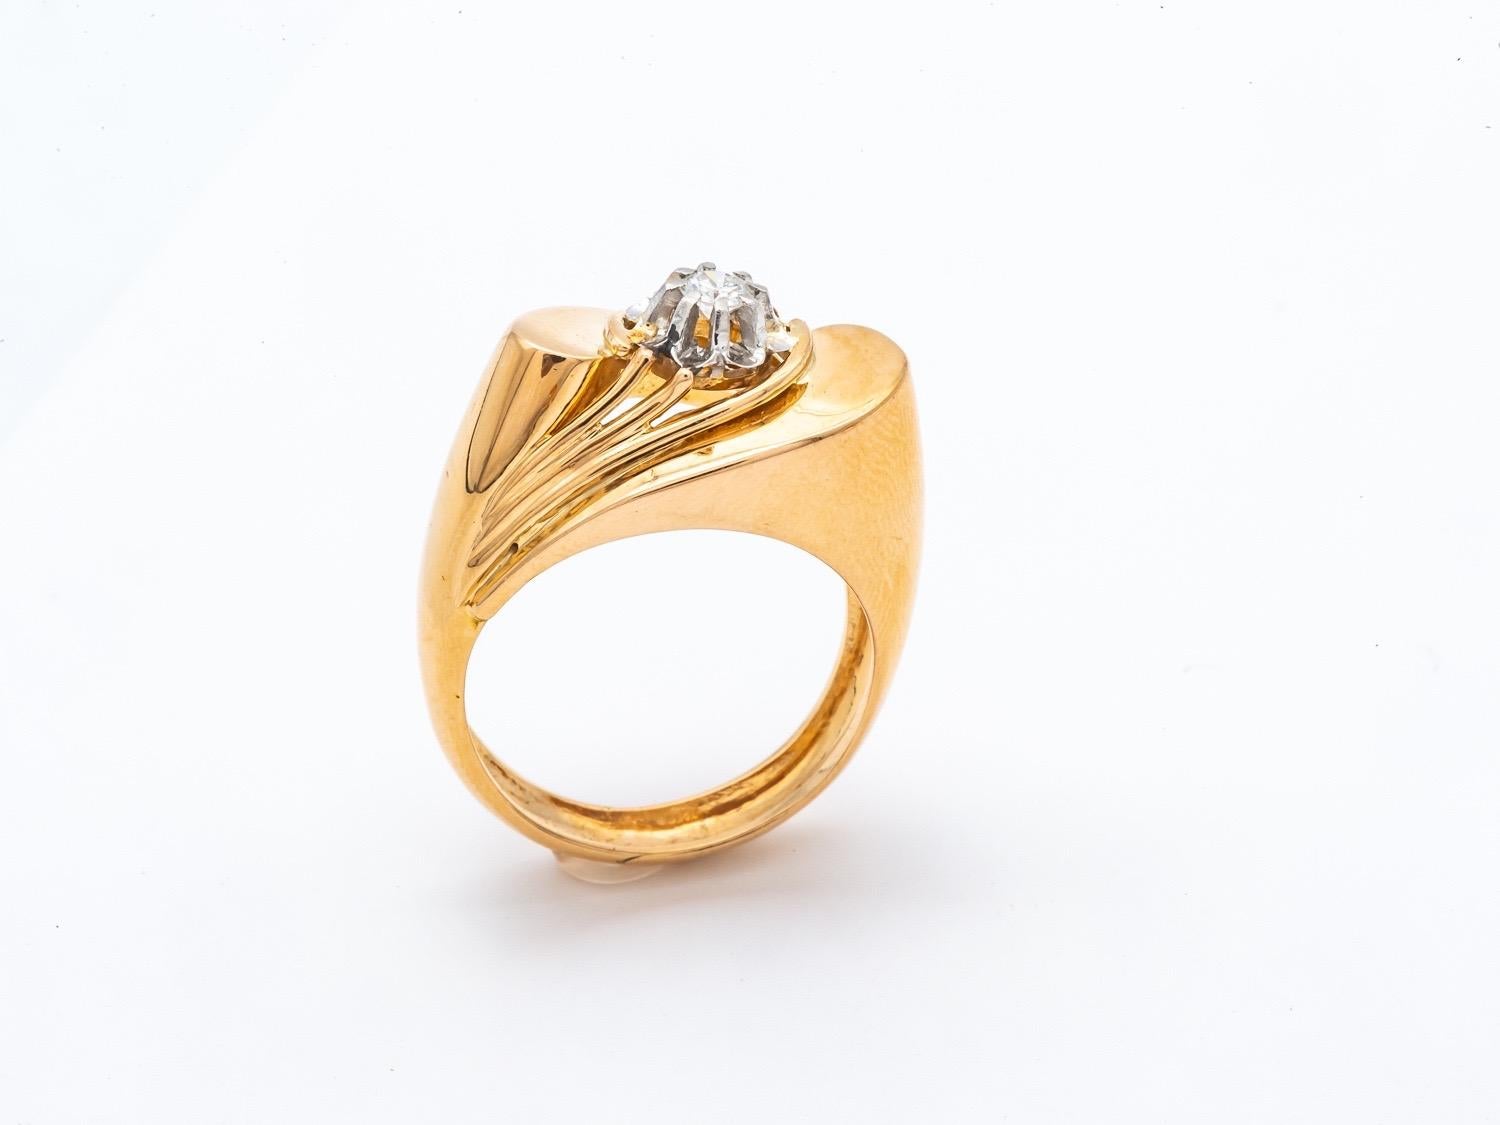 Discover the Tank ring in 18-carat yellow gold, a vintage piece that embodies the timeless elegance and retro charm of the 1940s/1950s. Topped with a magnificent 0.12-carat brilliant-cut diamond, this ring is a true treasure that will delight lovers